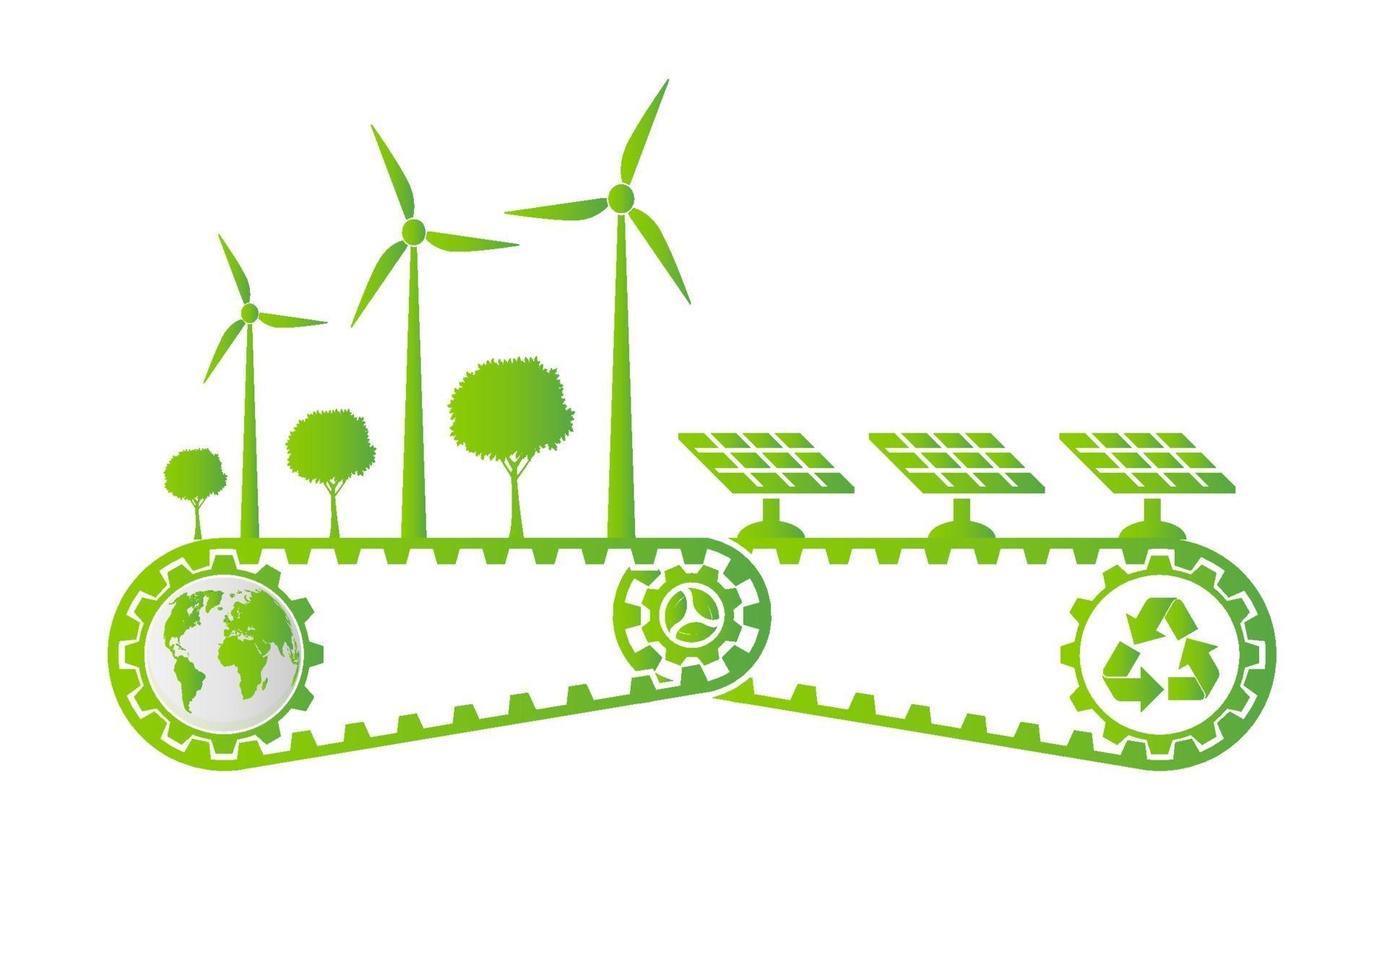 Ecology Saving Gear Concept And Environmental Sustainable Energy Development,Vector illustration vector